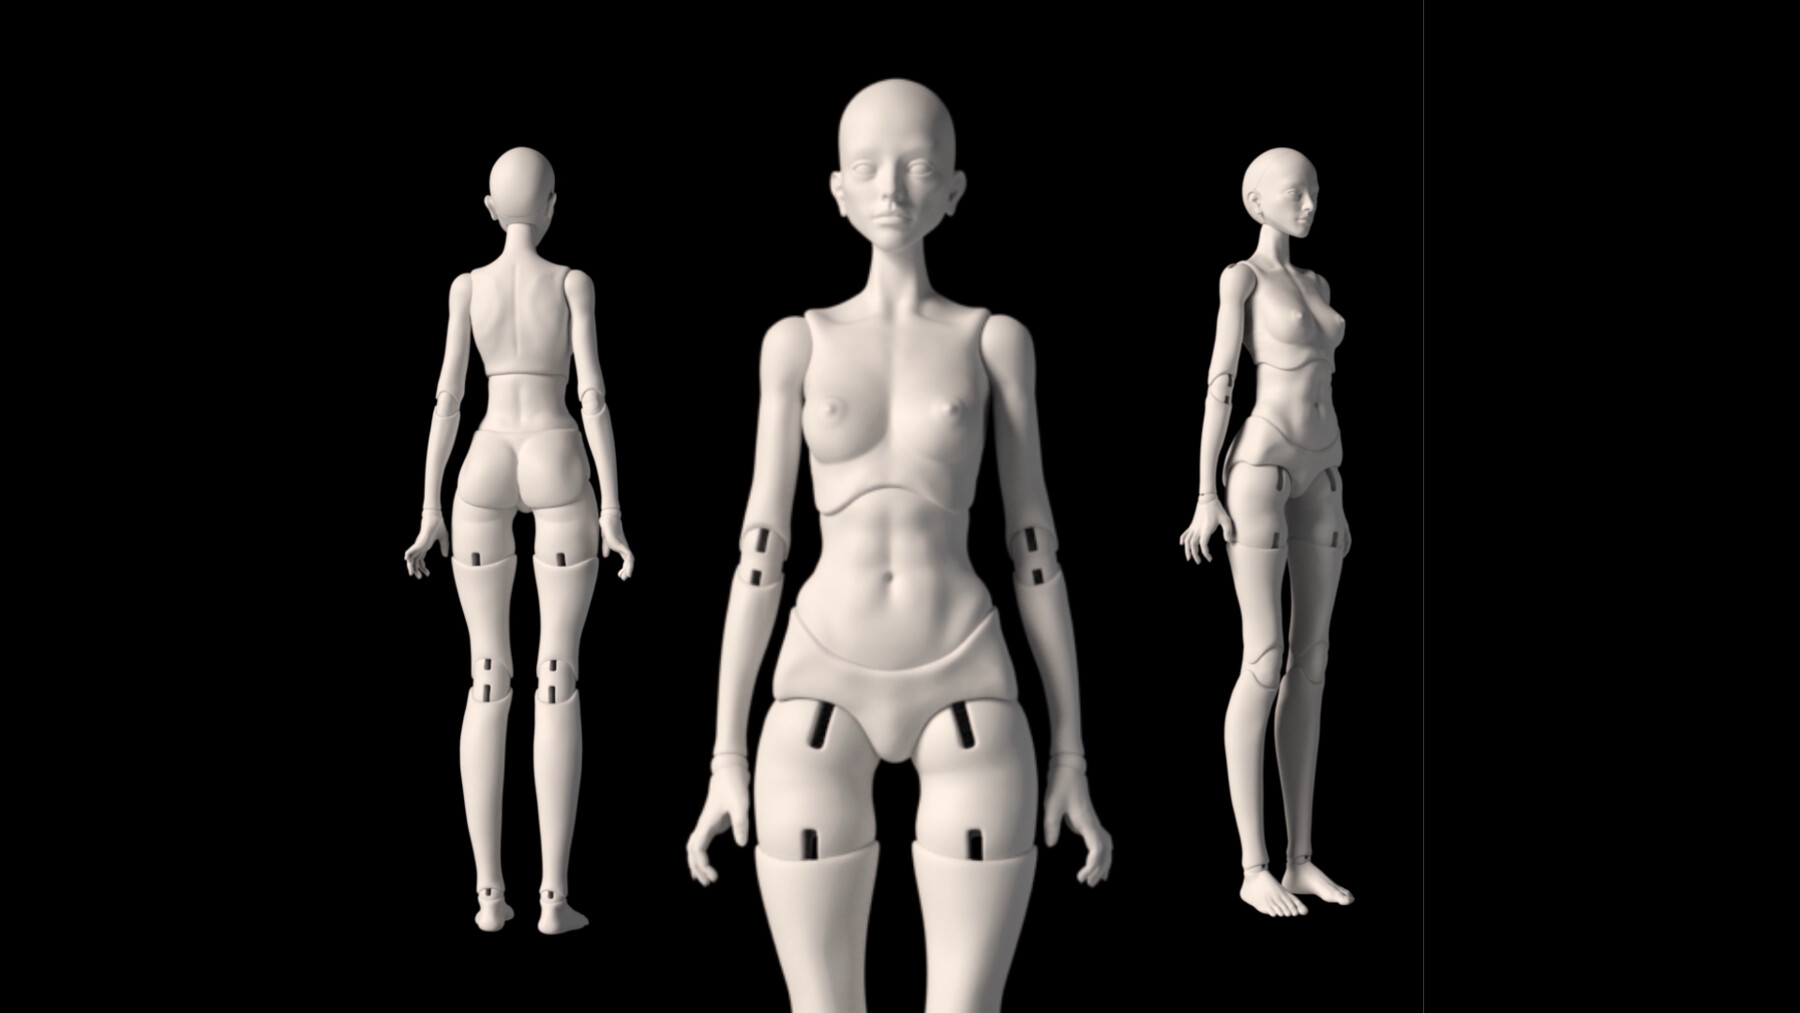 ball jointed doll 3d model free